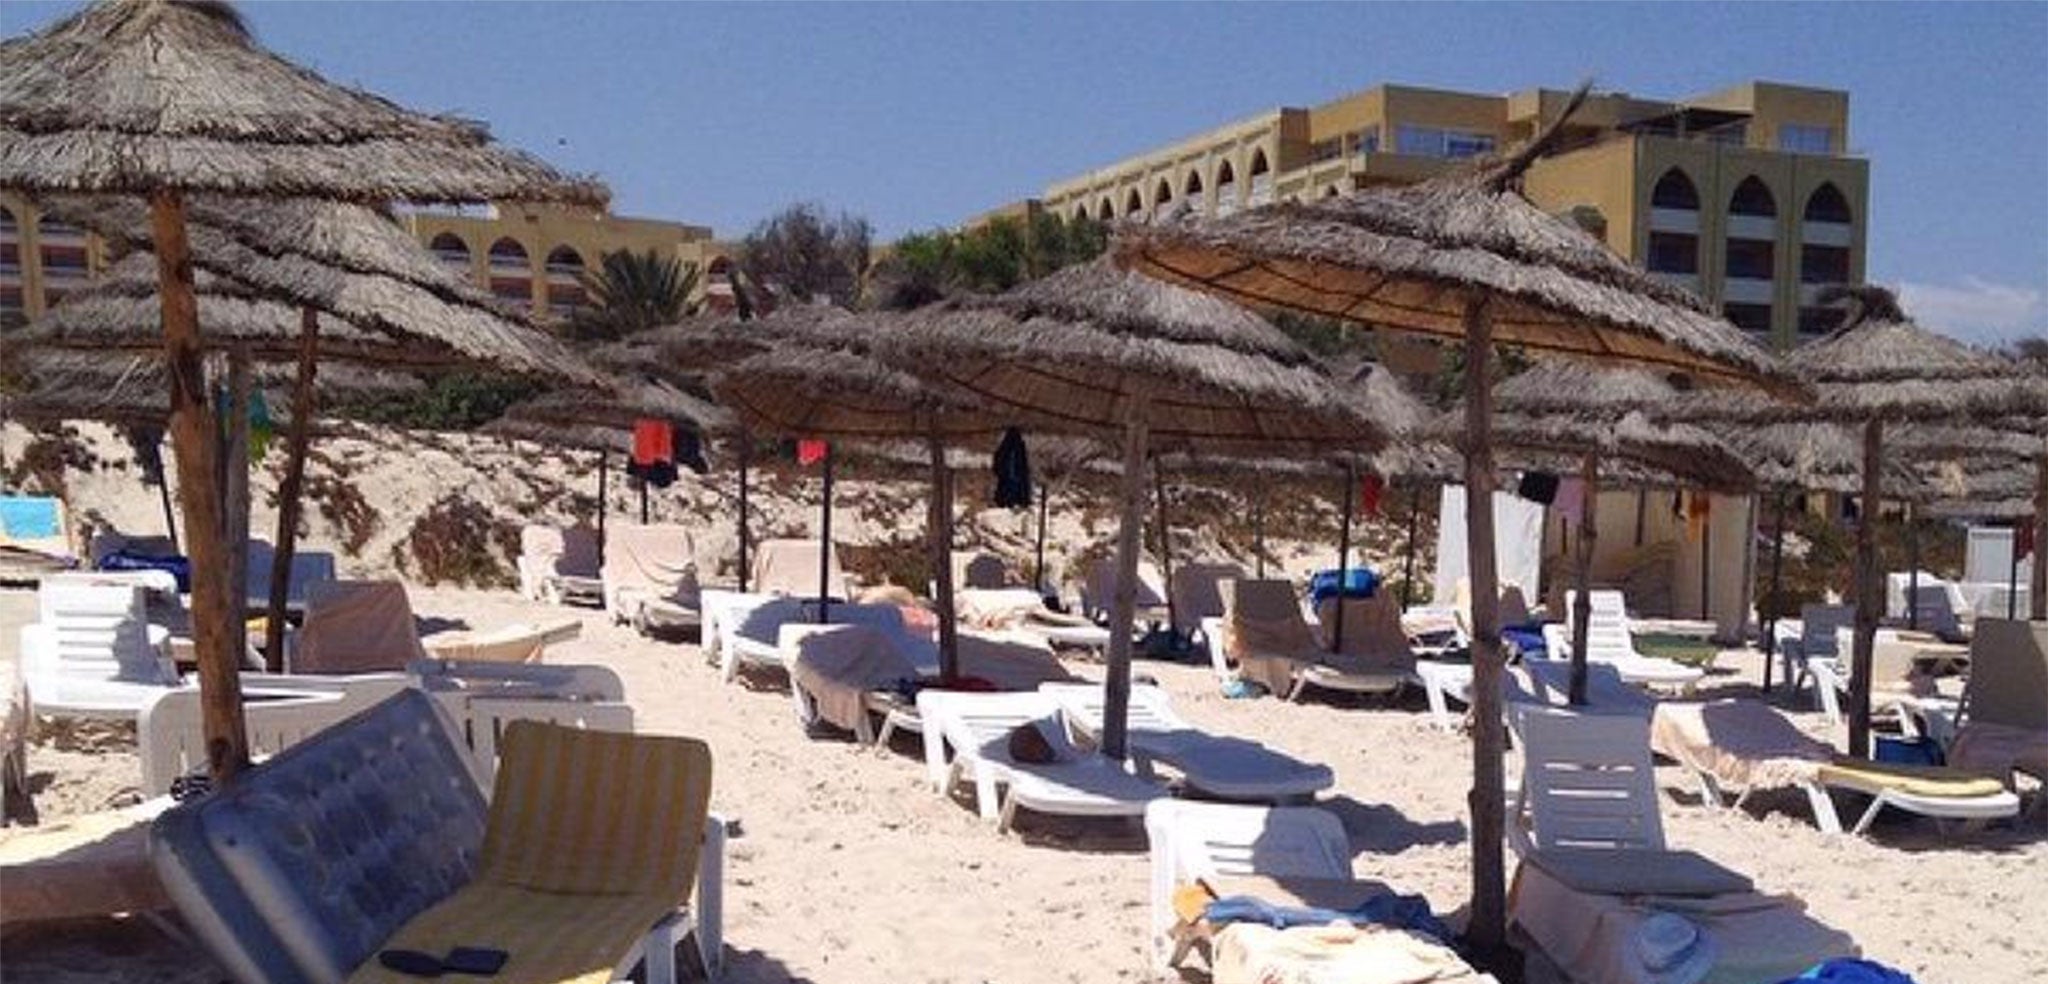 A beach in al-Sousse, 150 kilometers fromTunisia, where unknown assailants detonated at least one bomb then opened fire on tourists at two hotels